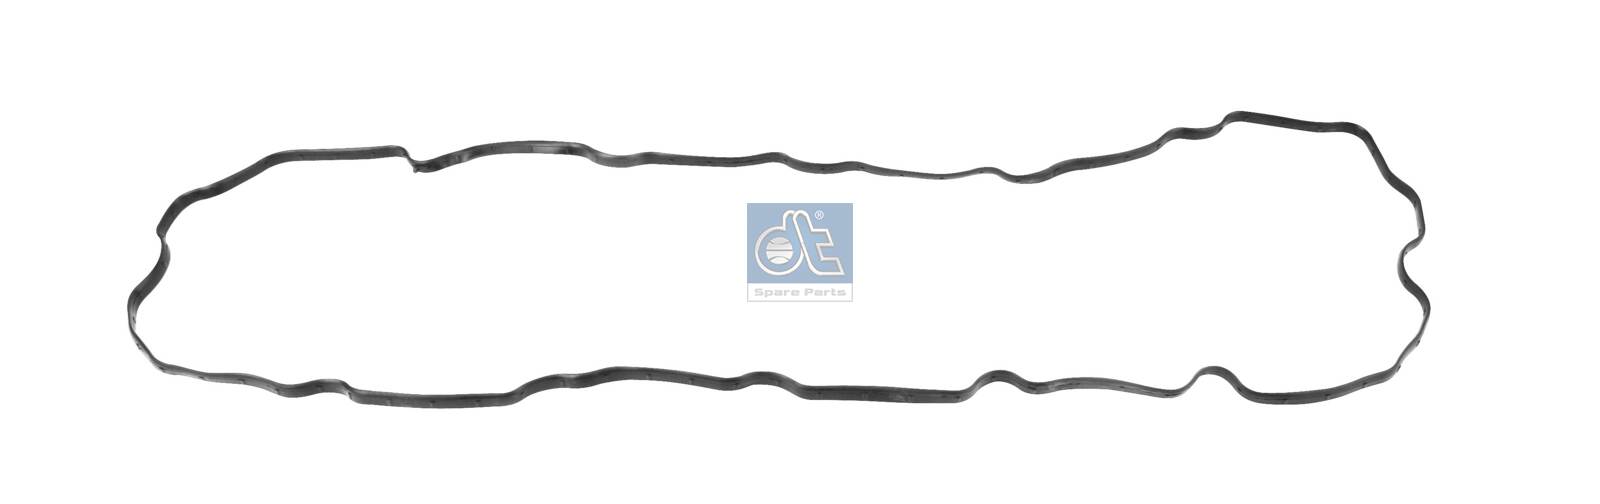 6.22122, Gasket, cylinder head cover, DT Spare Parts, 5010295777, 078.023, 16-349000010, 20500.30, 243.520, 45405, 70-37697-00, 920000, 71-37697-00